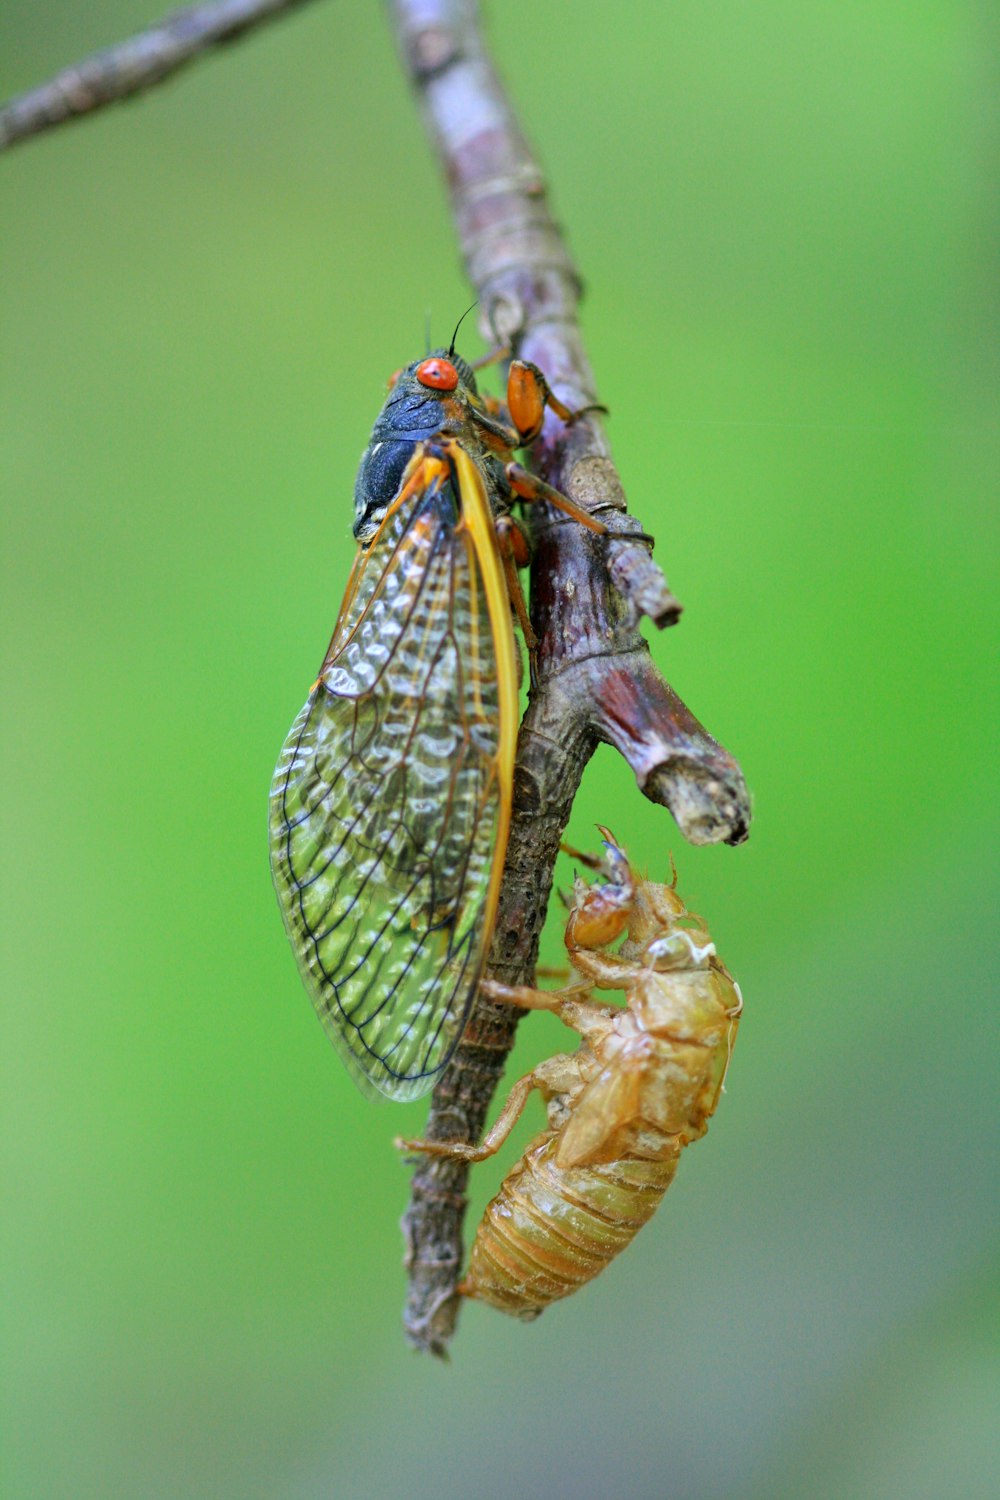 a couple of bugs hanging from a tree branch